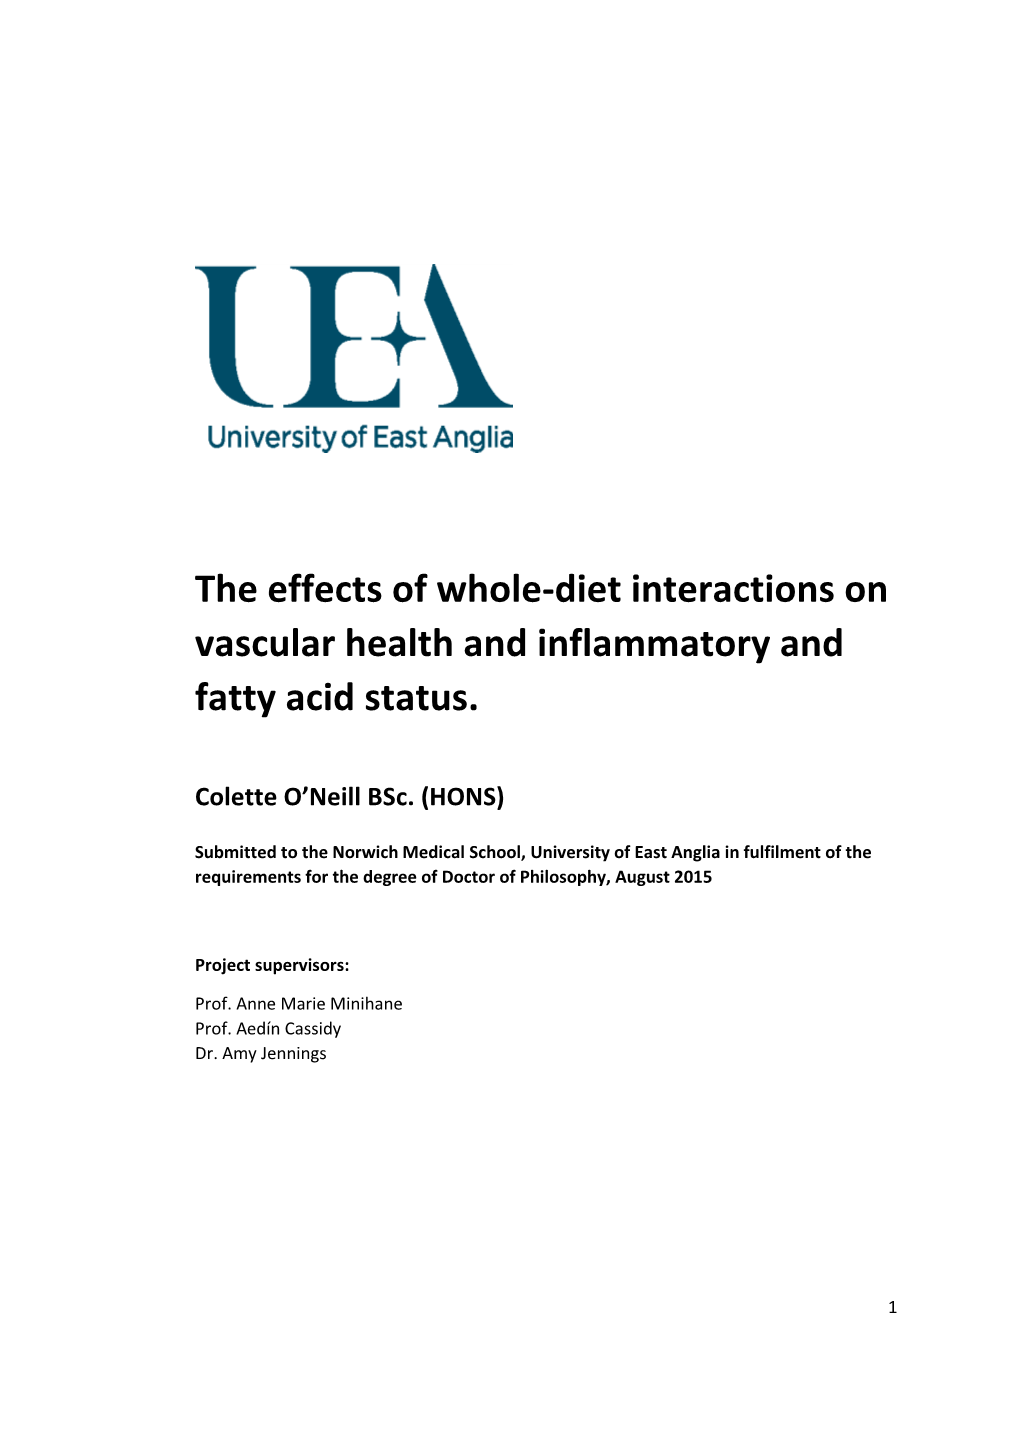 The Effects of Whole-Diet Interactions on Vascular Health and Inflammatory and Fatty Acid Status